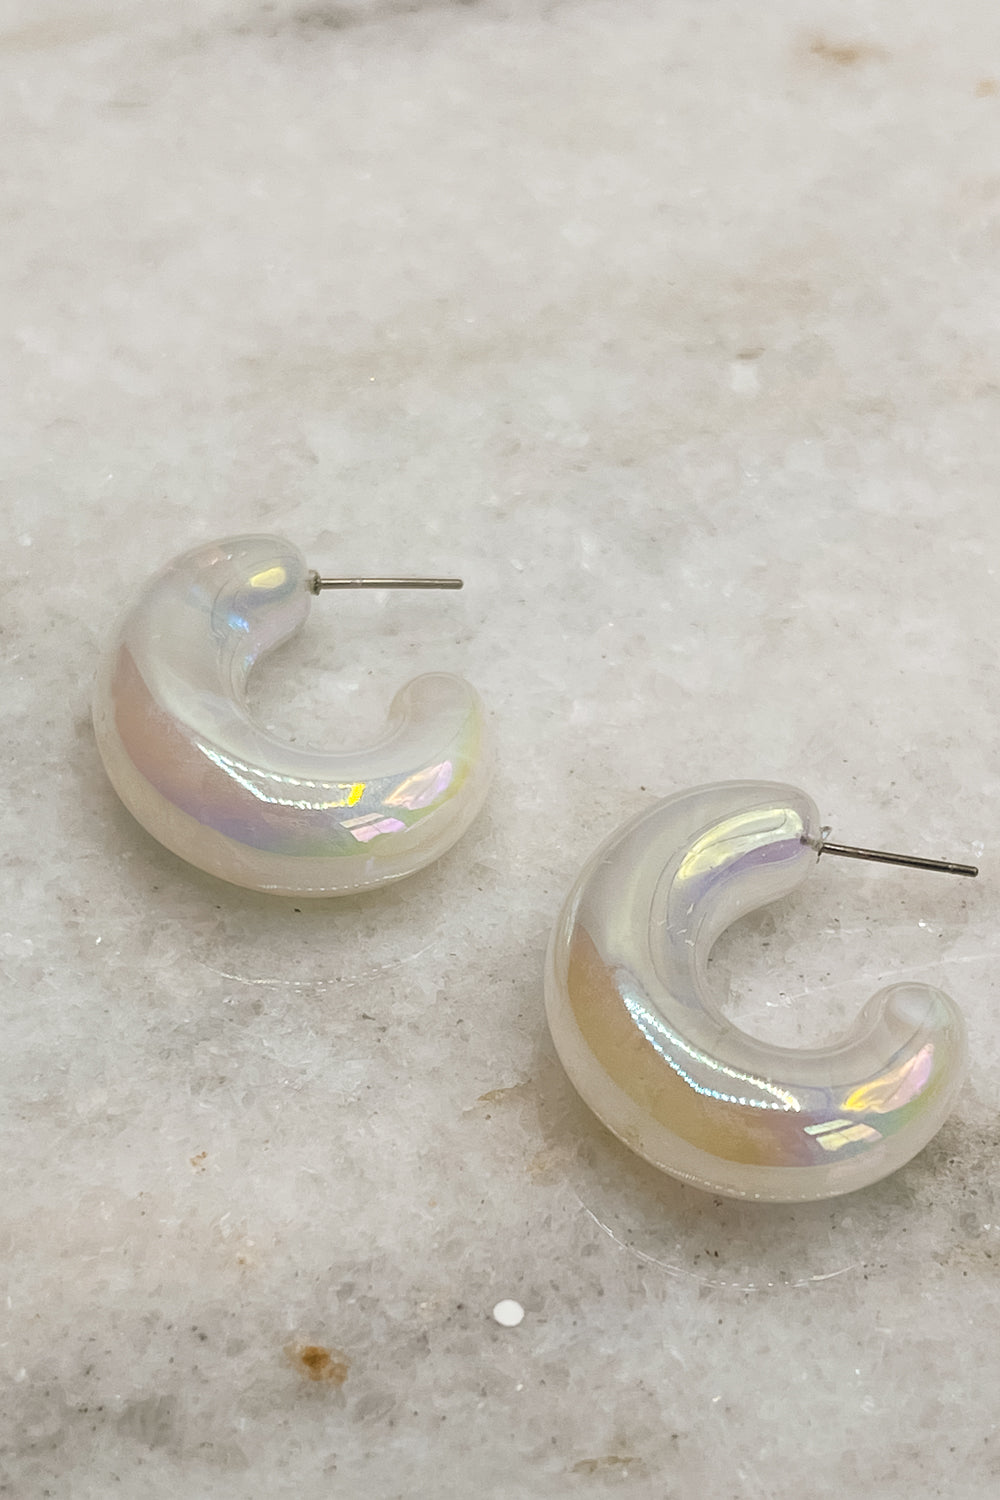 Image shows the Calista Iridescent Scoop Hoop Earrings against a white marble background. Earrings have white iridescent material with open hoop shape.